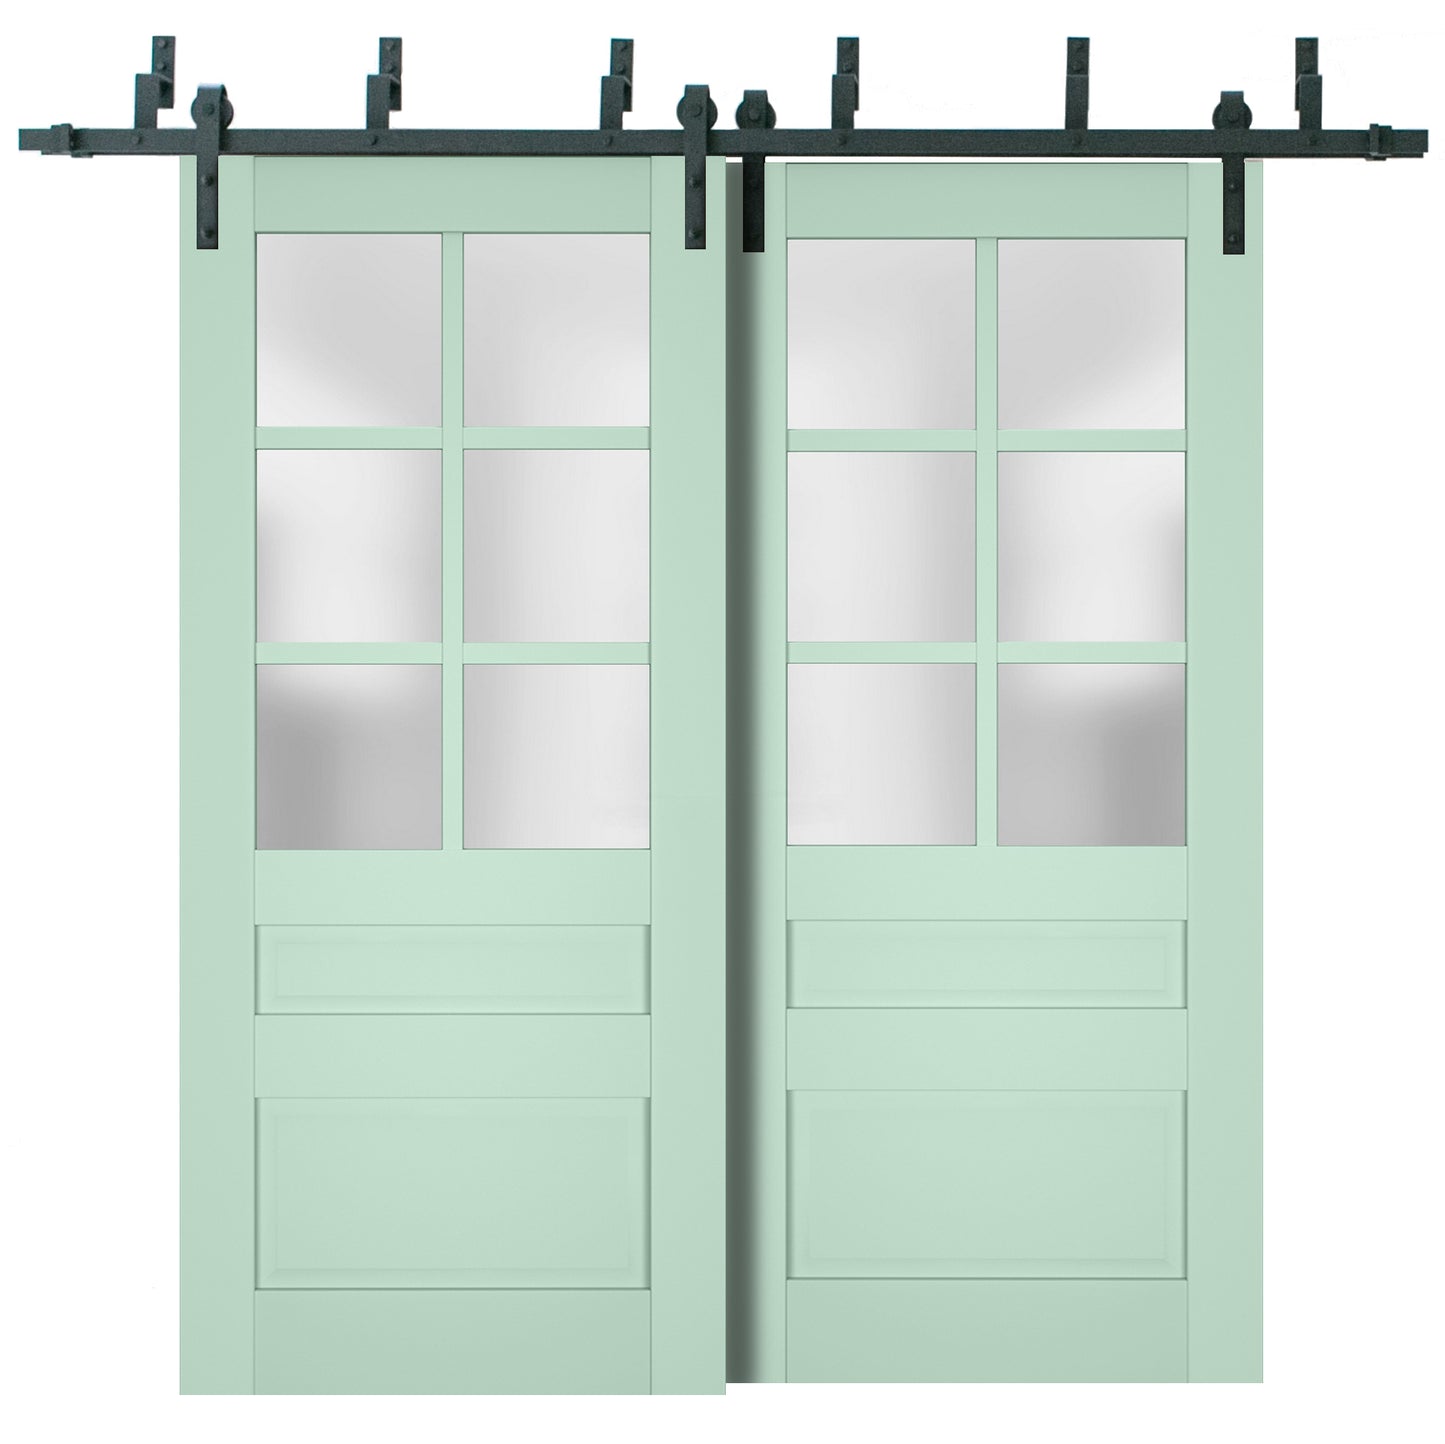 Veregio 7339 Oliva Double Barn Door with Frosted Glass and Black Bypass Rail